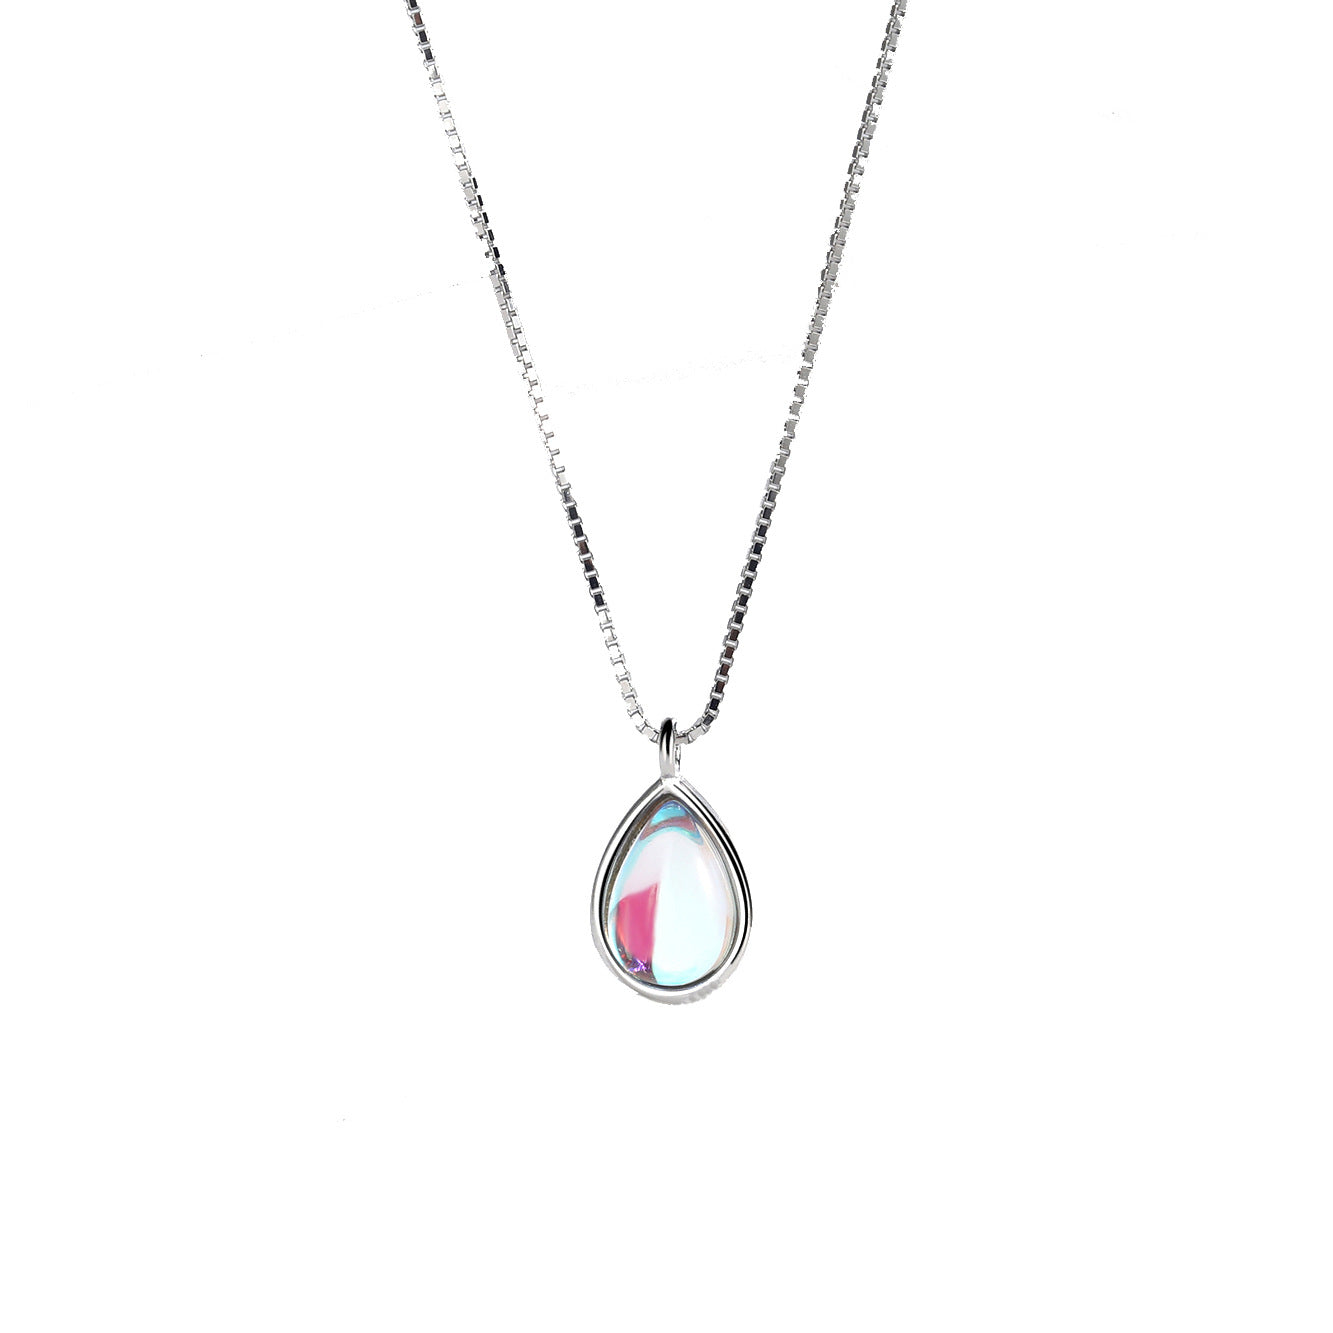 Sterling Sliver Water Drop Pendant Necklace-Necklaces-The same as picture-Free Shipping Leatheretro